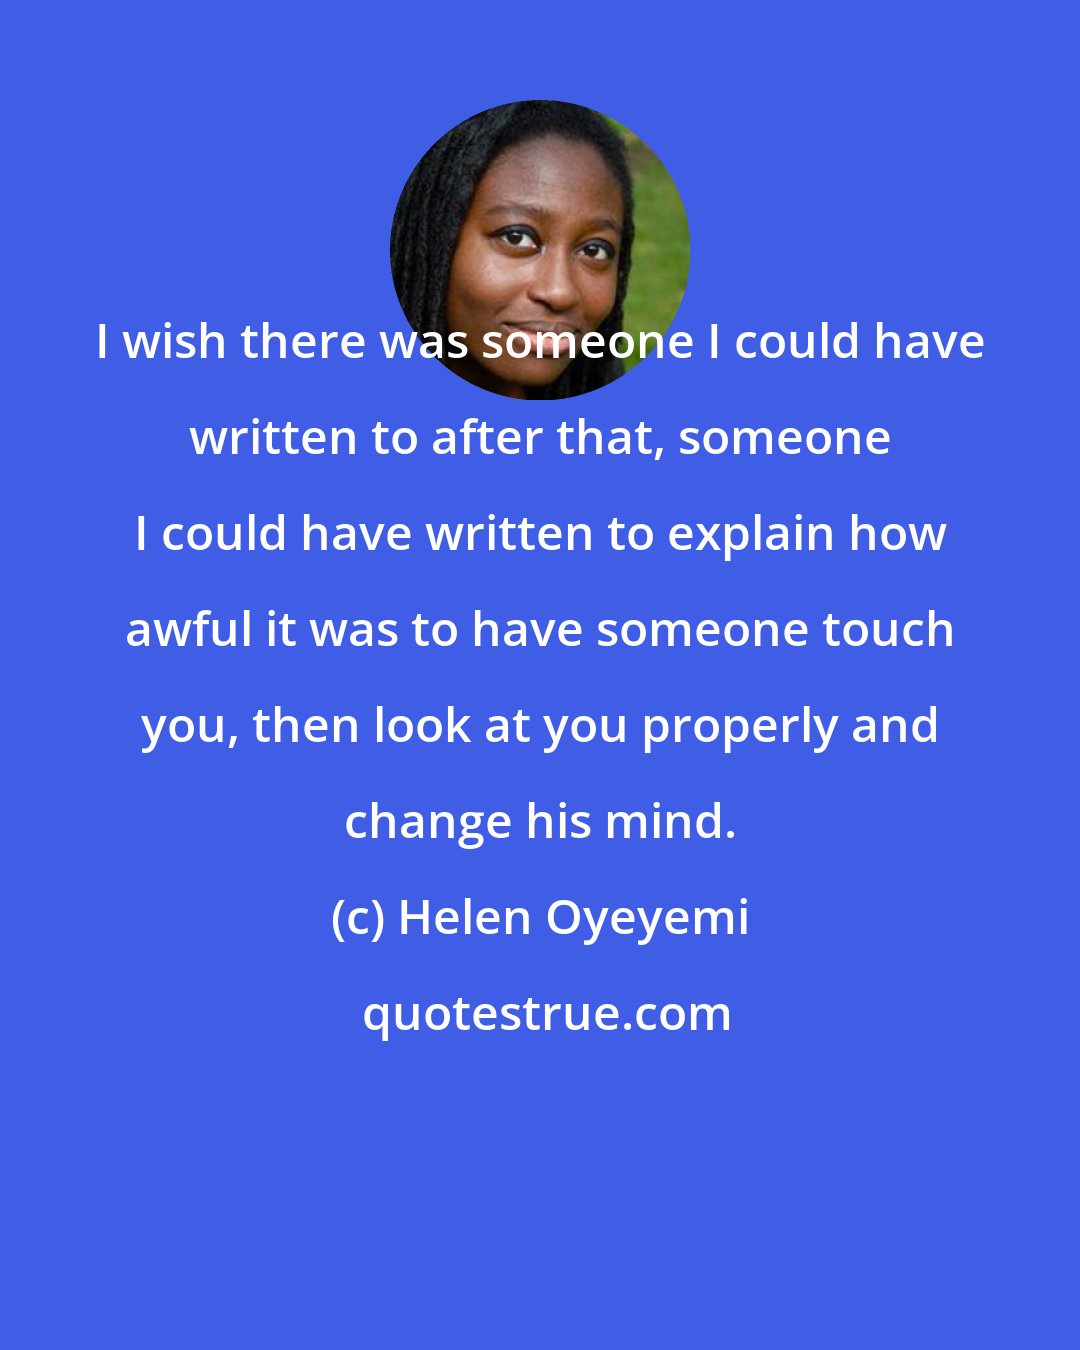 Helen Oyeyemi: I wish there was someone I could have written to after that, someone I could have written to explain how awful it was to have someone touch you, then look at you properly and change his mind.